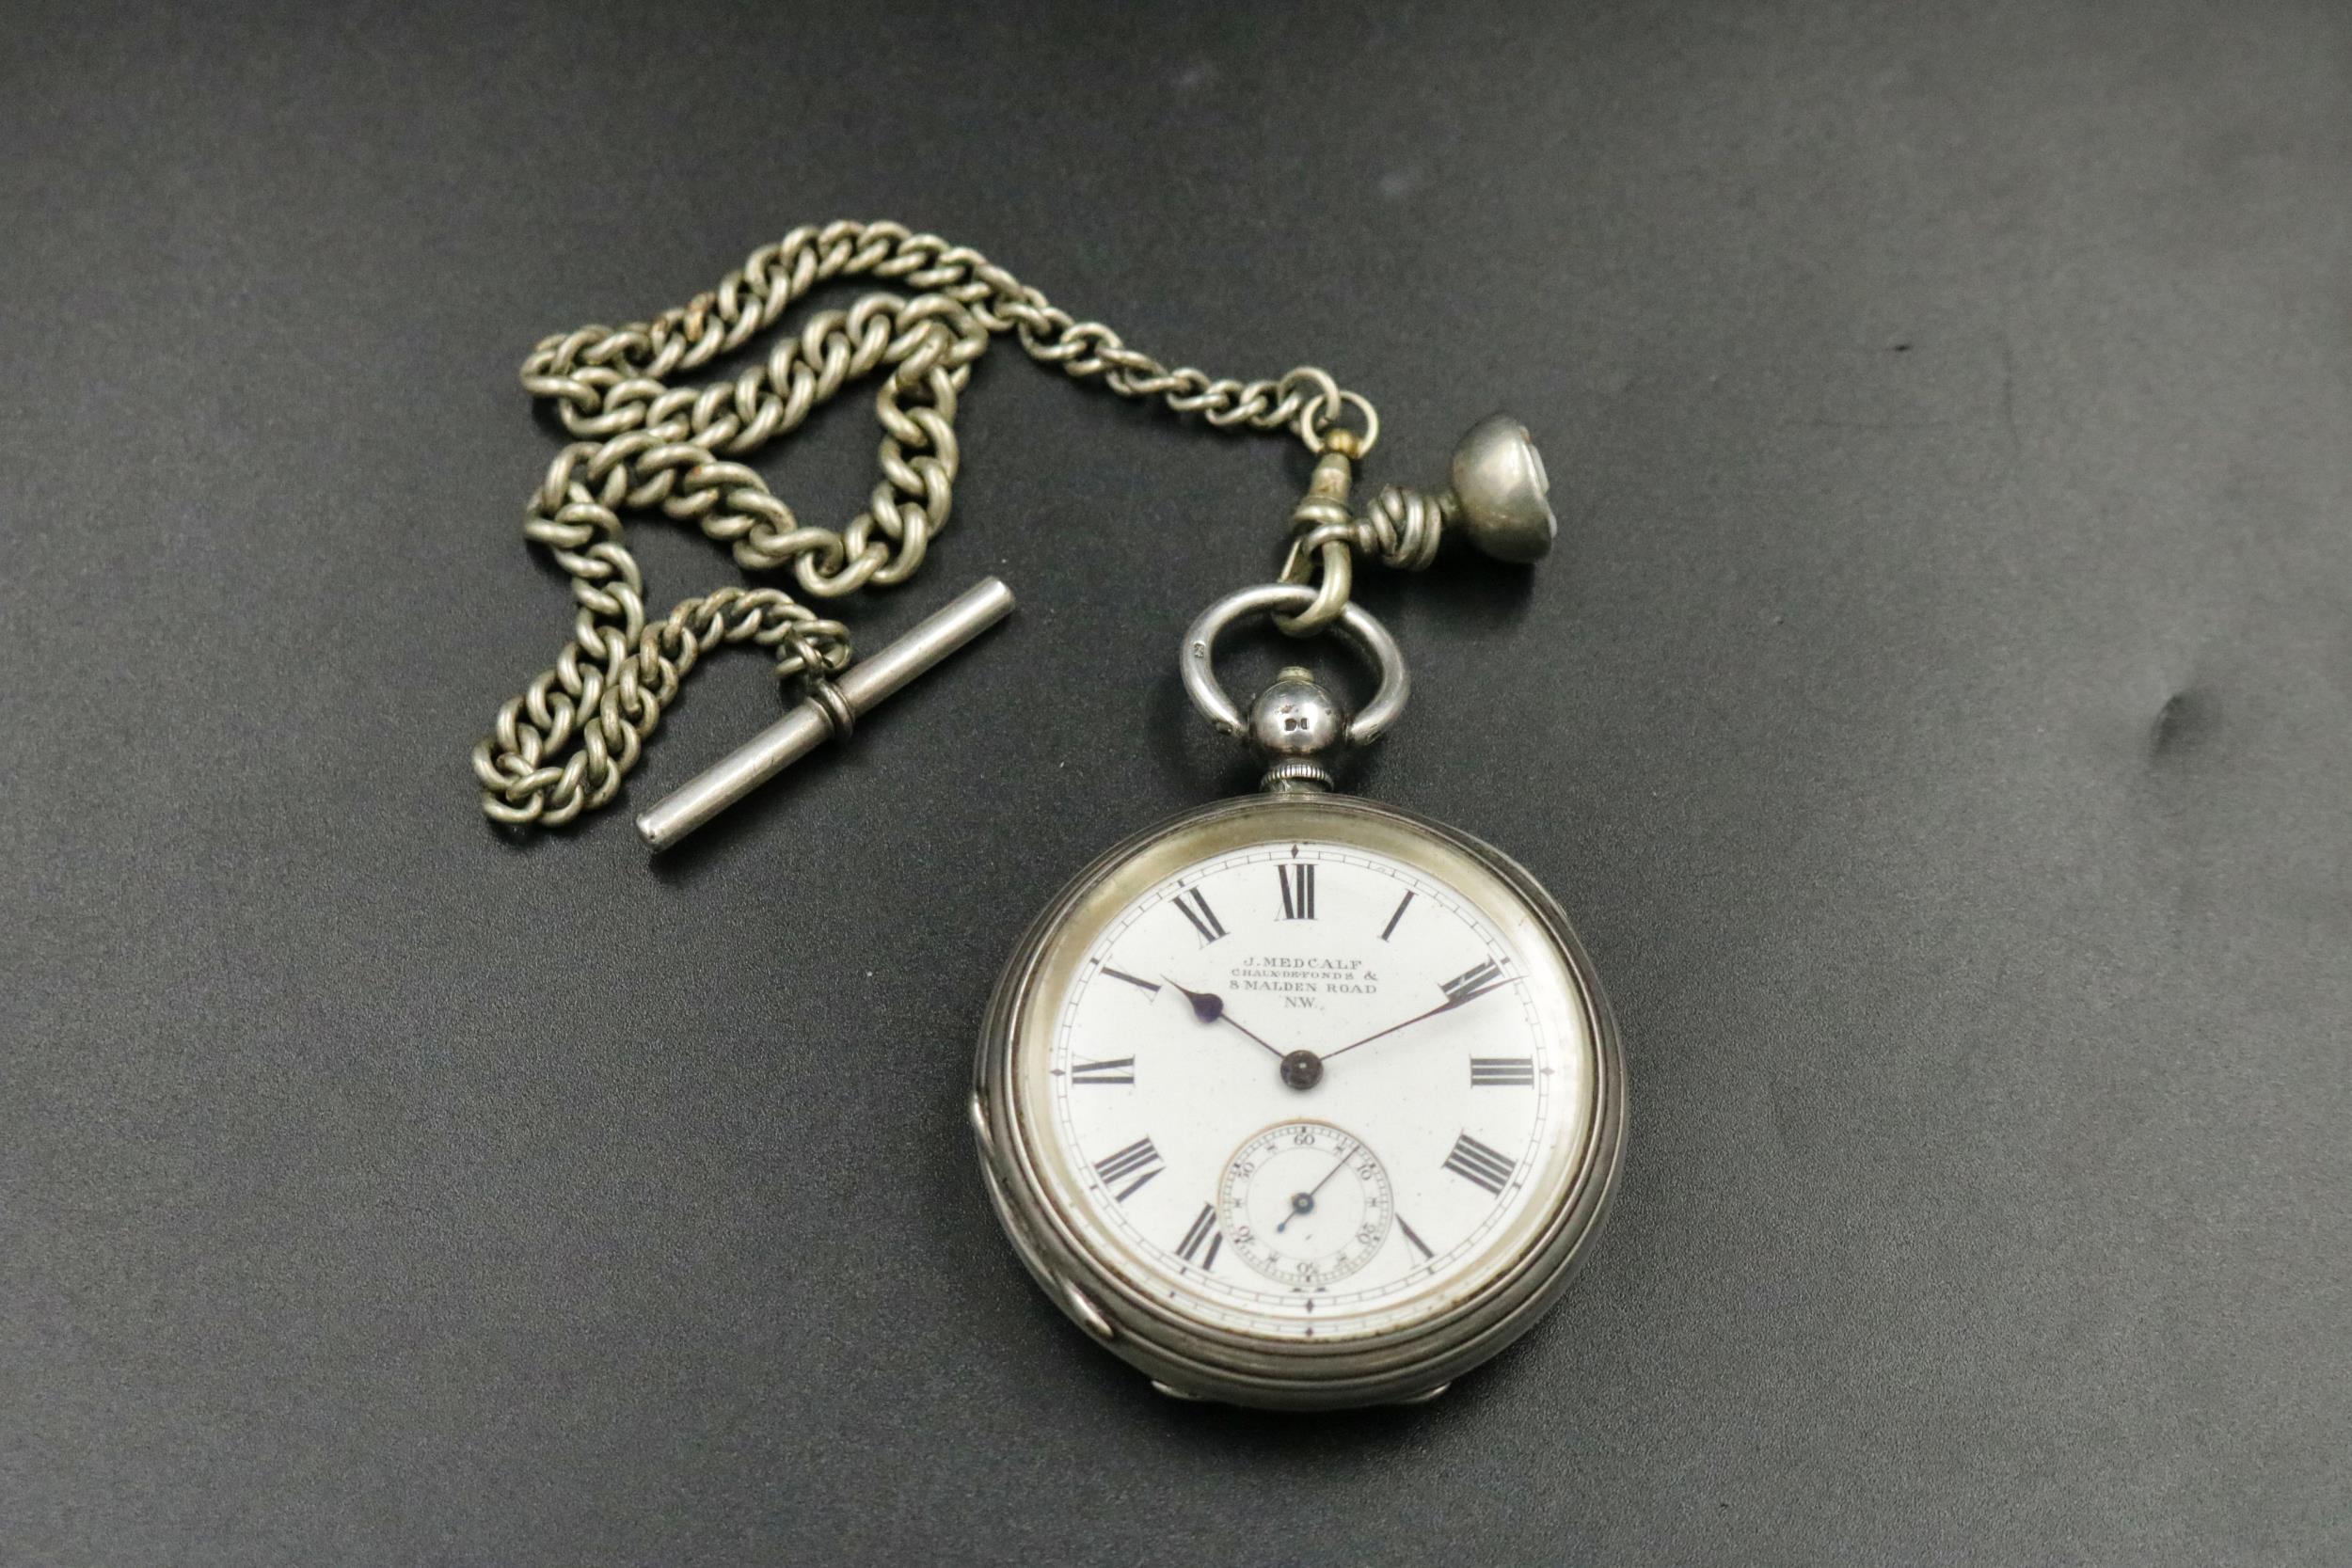 Silver Pocket watch by J. Medcalf London 1877. Winder works but watch A/F (chain not silver)